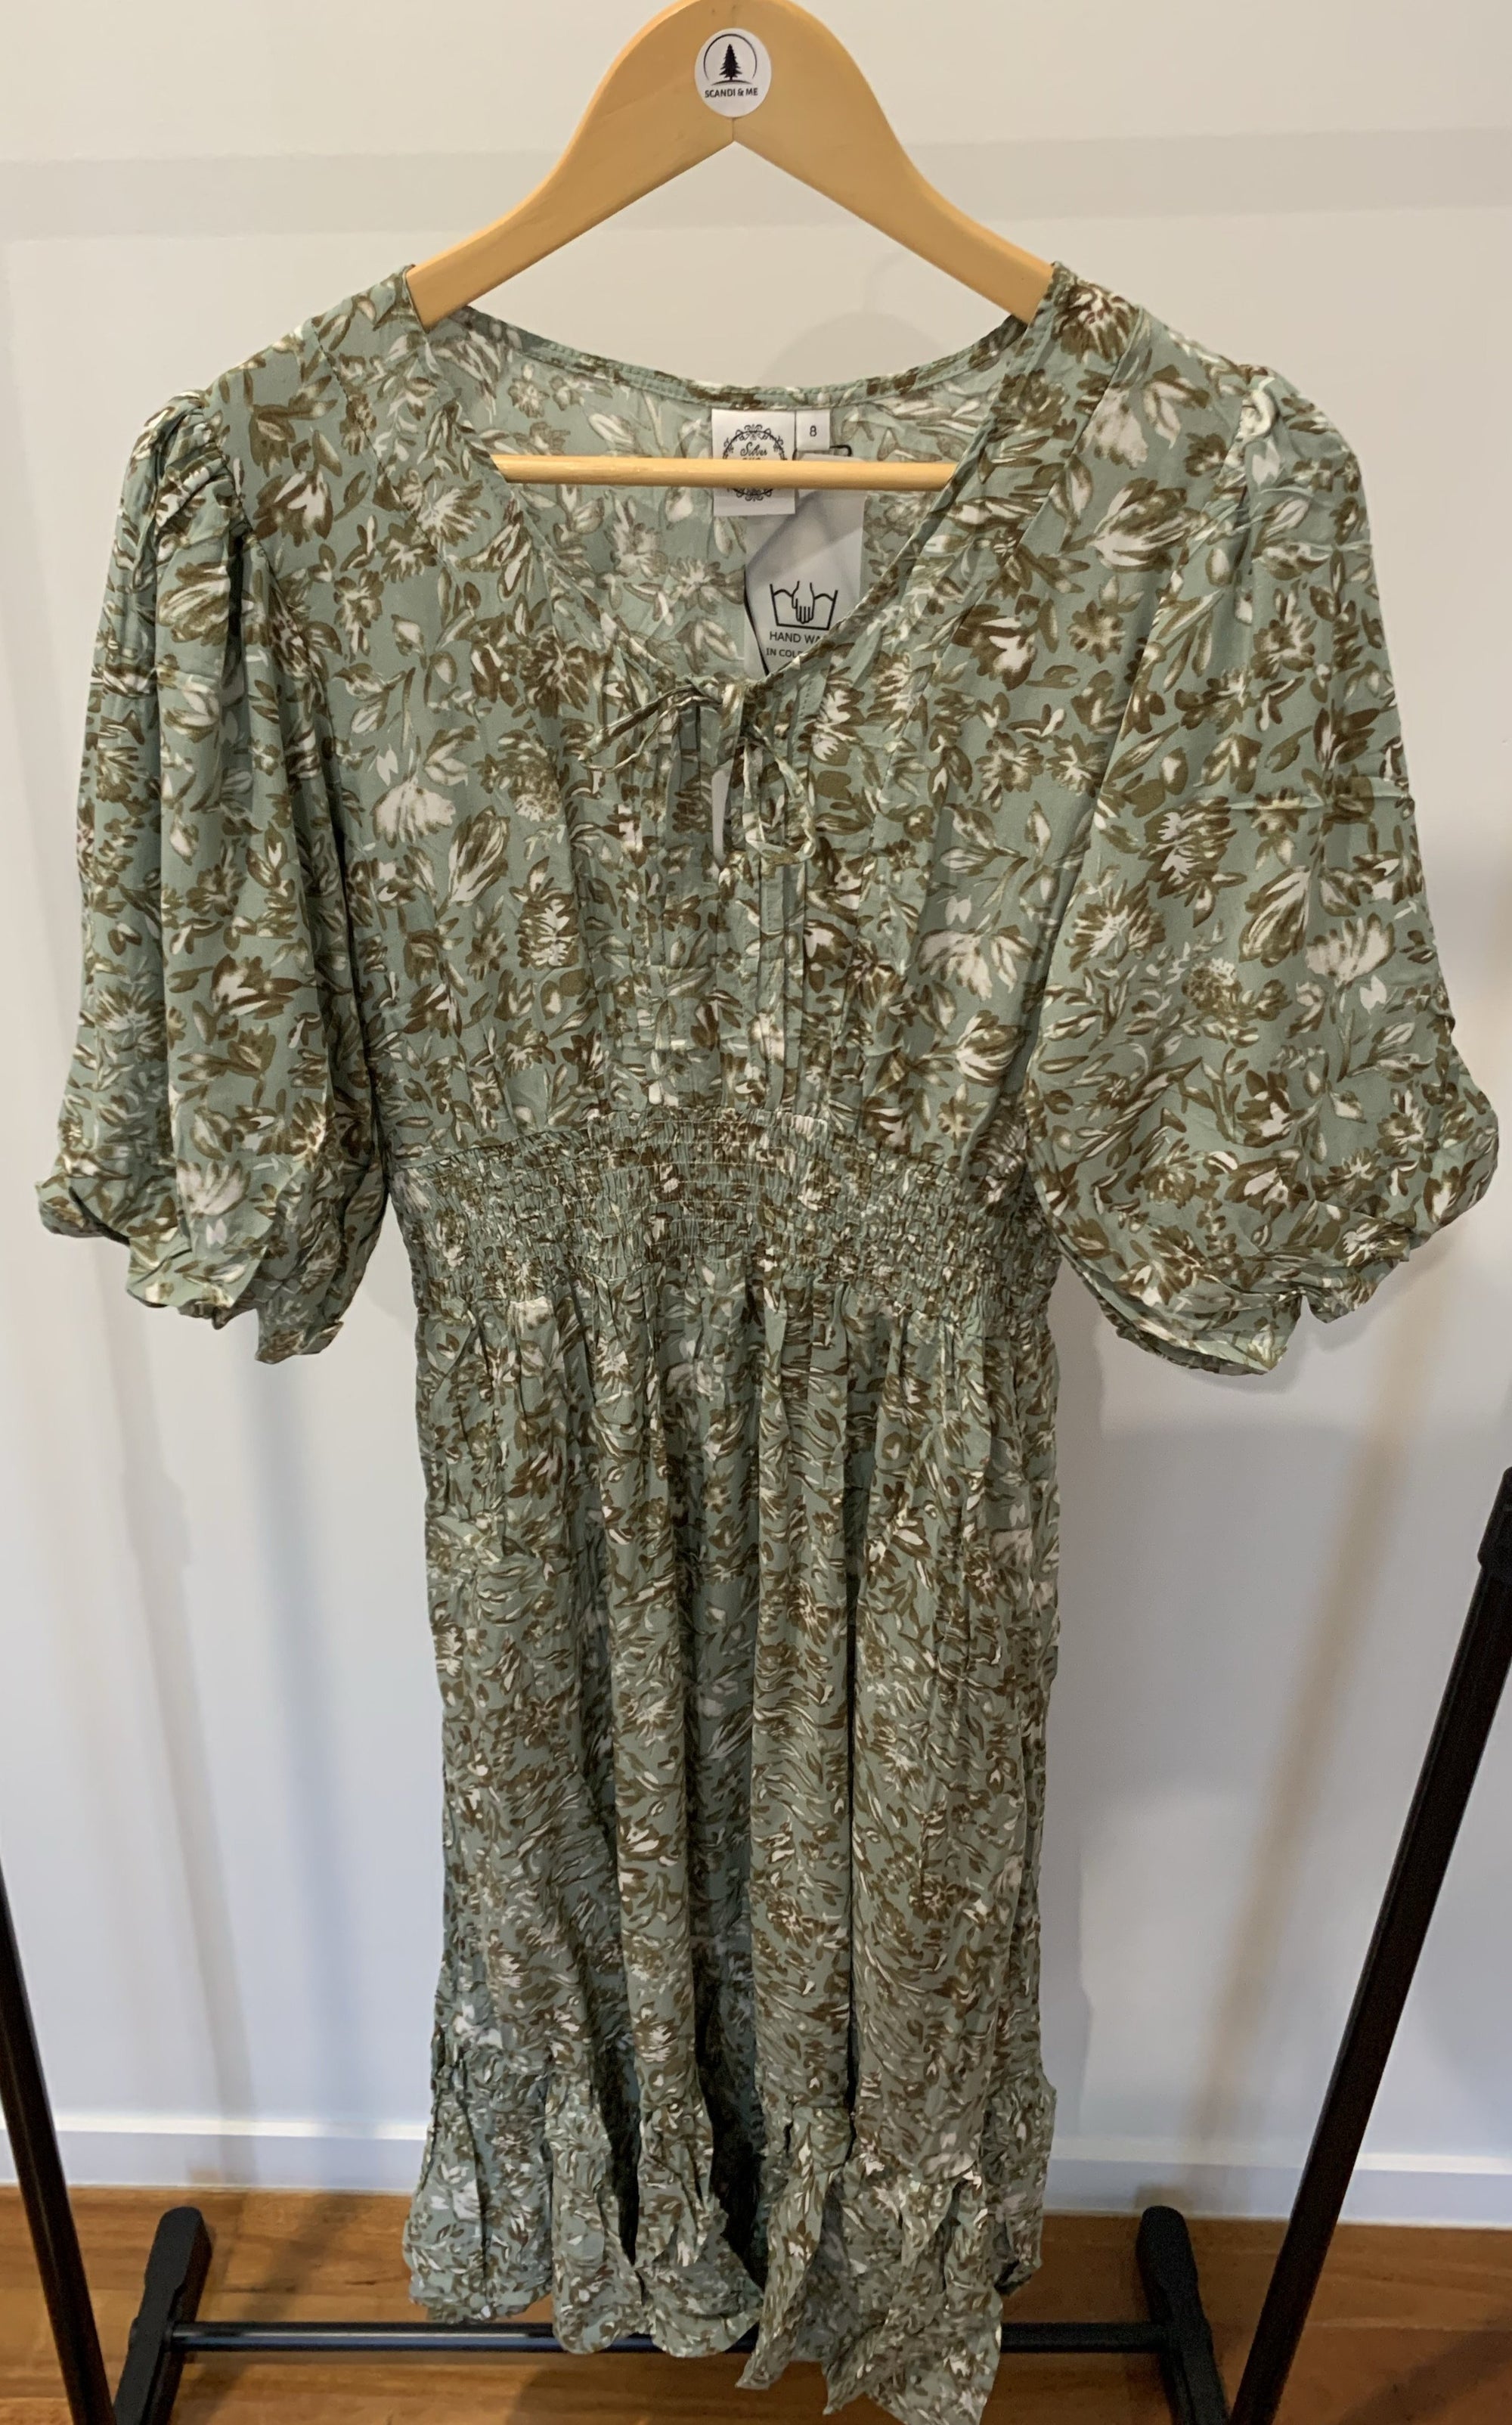 Silver Wishes Maxi Dress w Balloon Sleeve in Green Shades Size 8